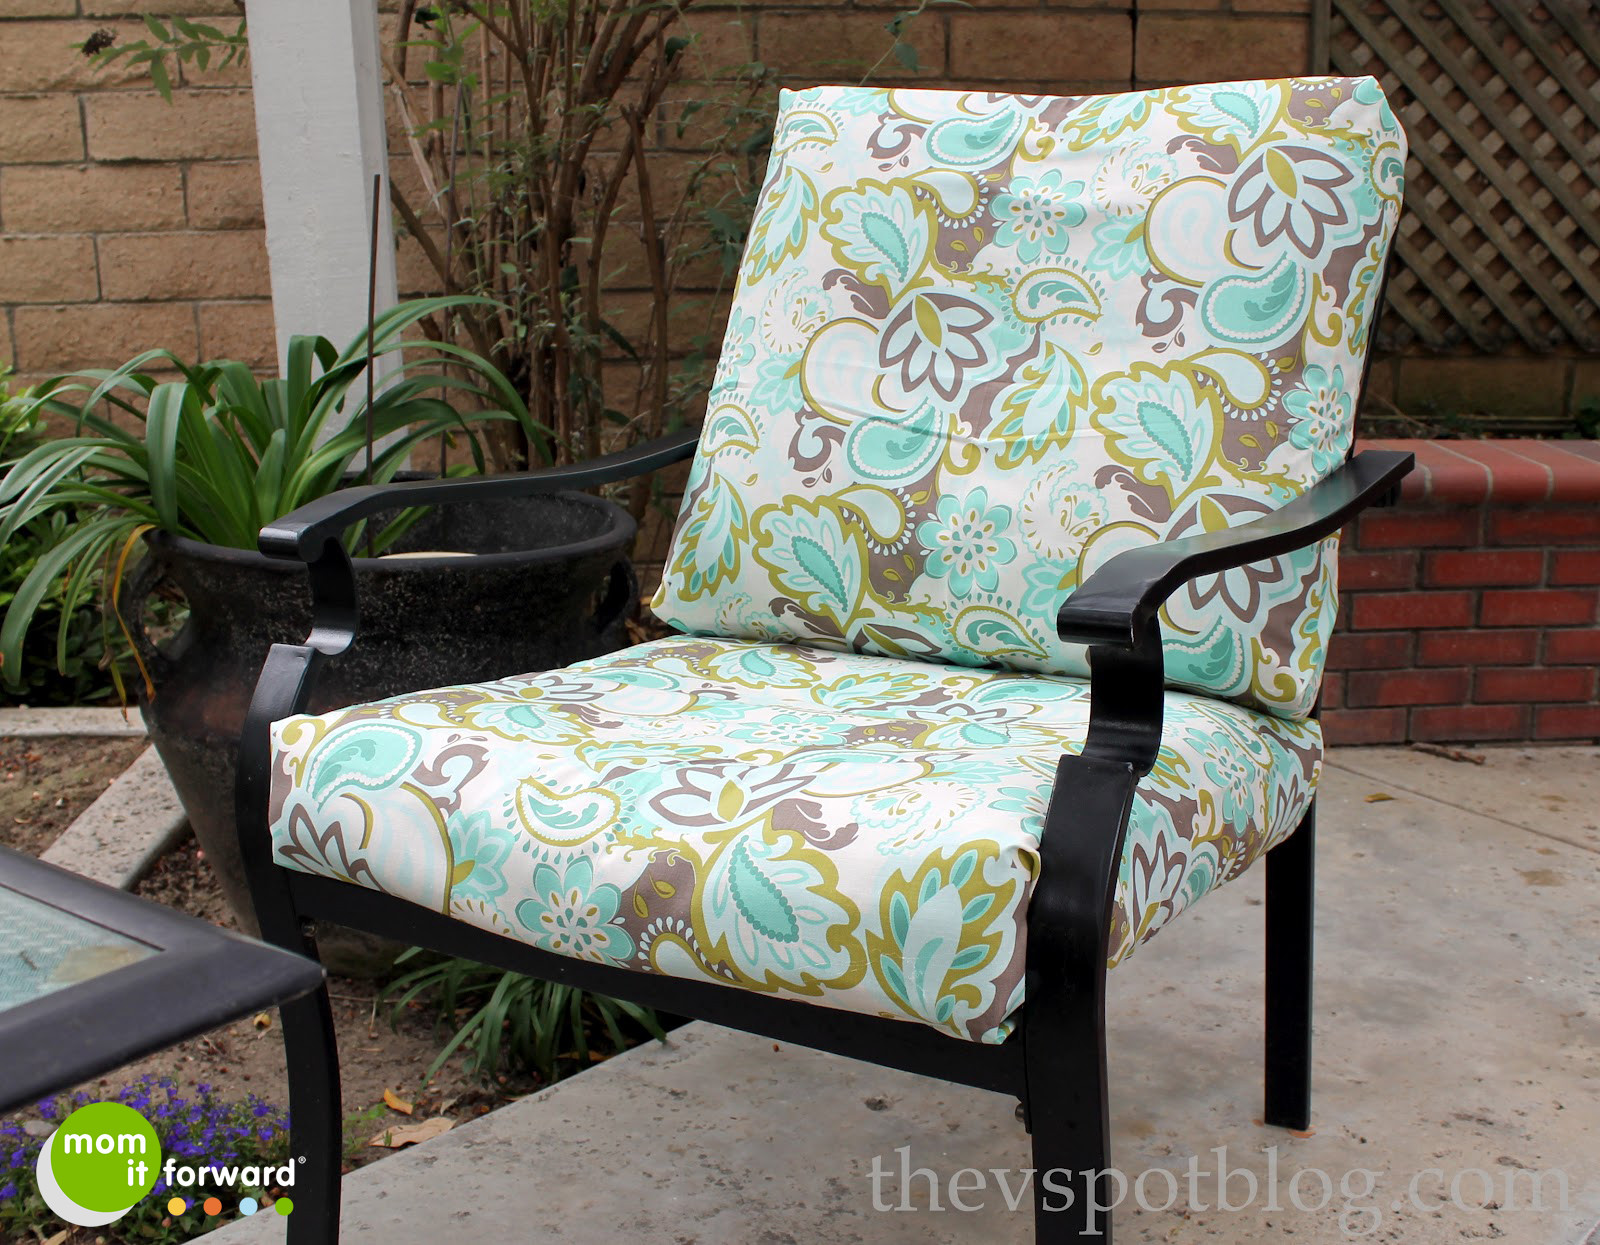 DIY Outdoor Furniture Covers
 DIY How to Recover Outdoor Furniture With a Glue Gun